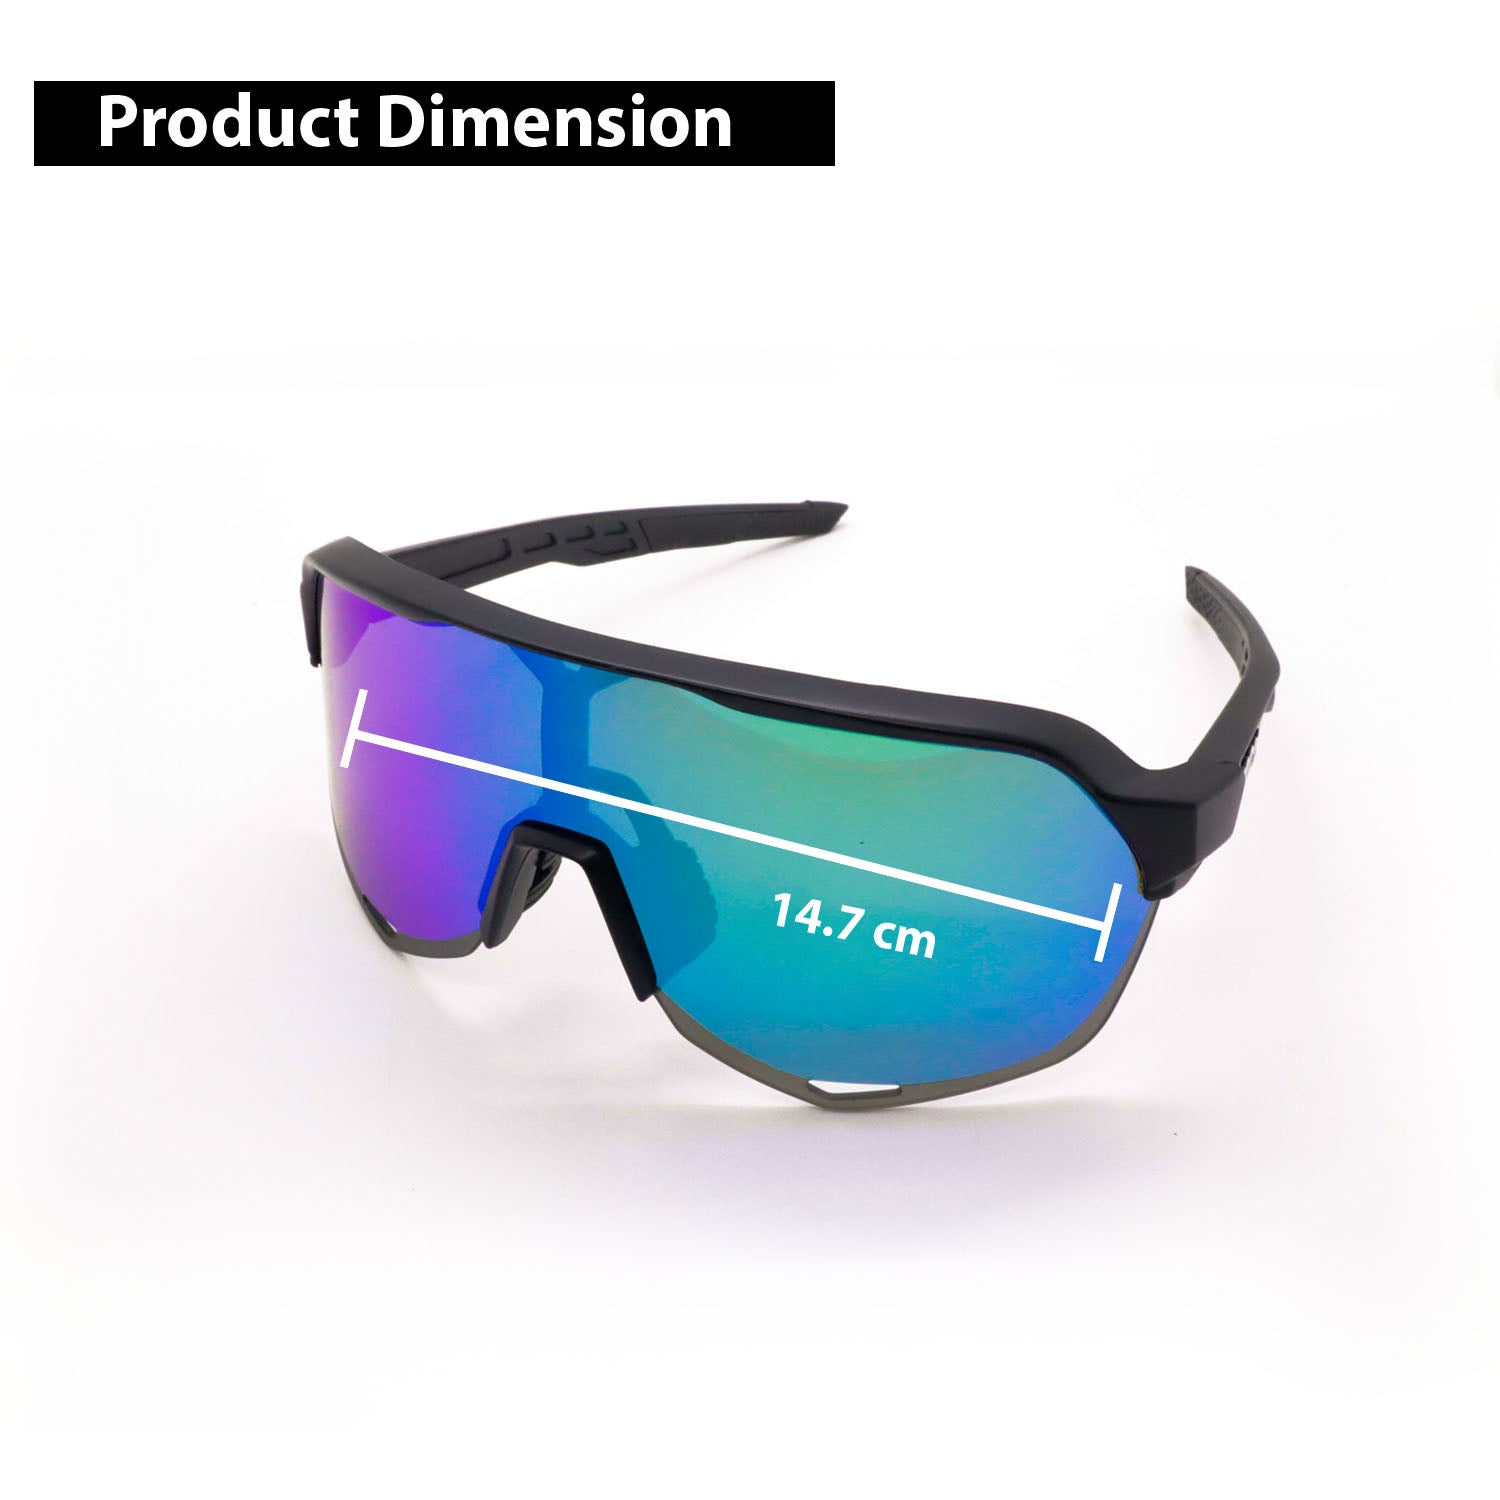 AUTOPOWERZ 100% Sport Performance Sunglasses - Sport and Cycling Eyewear include Extra 2 Lens